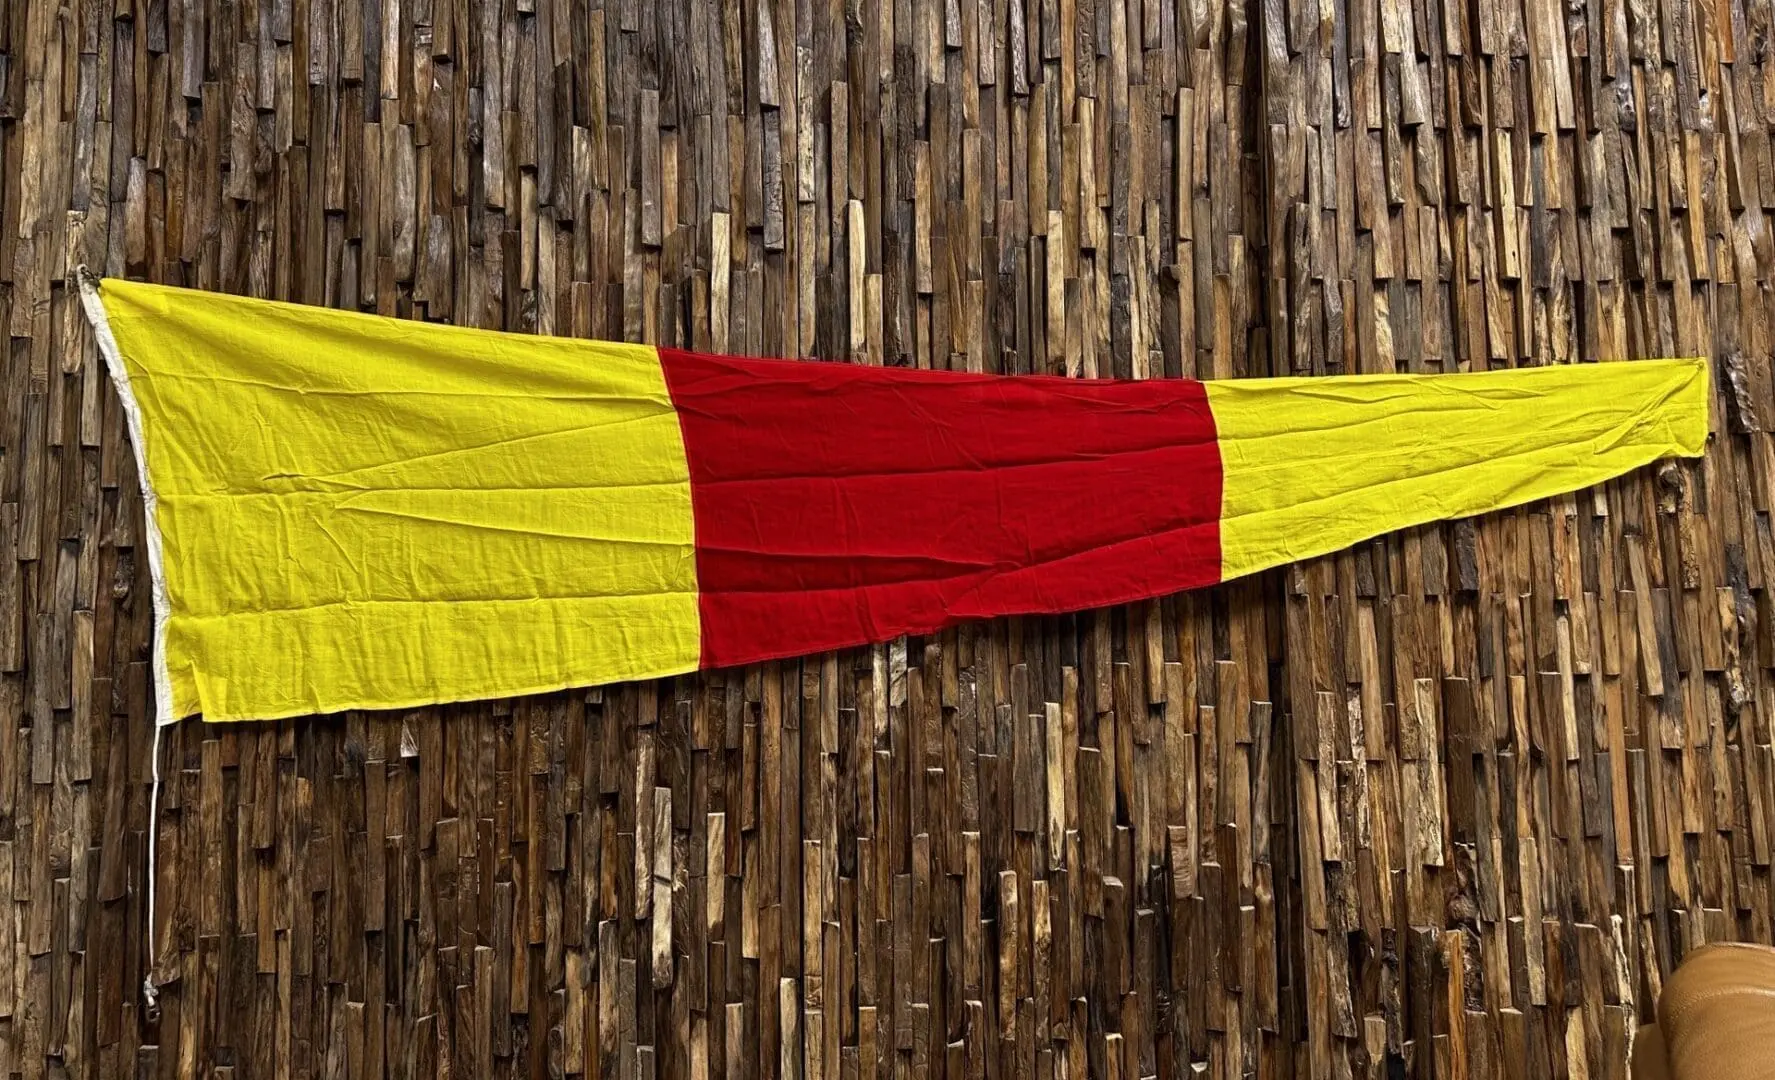 A red and yellow flag hanging on the wall.